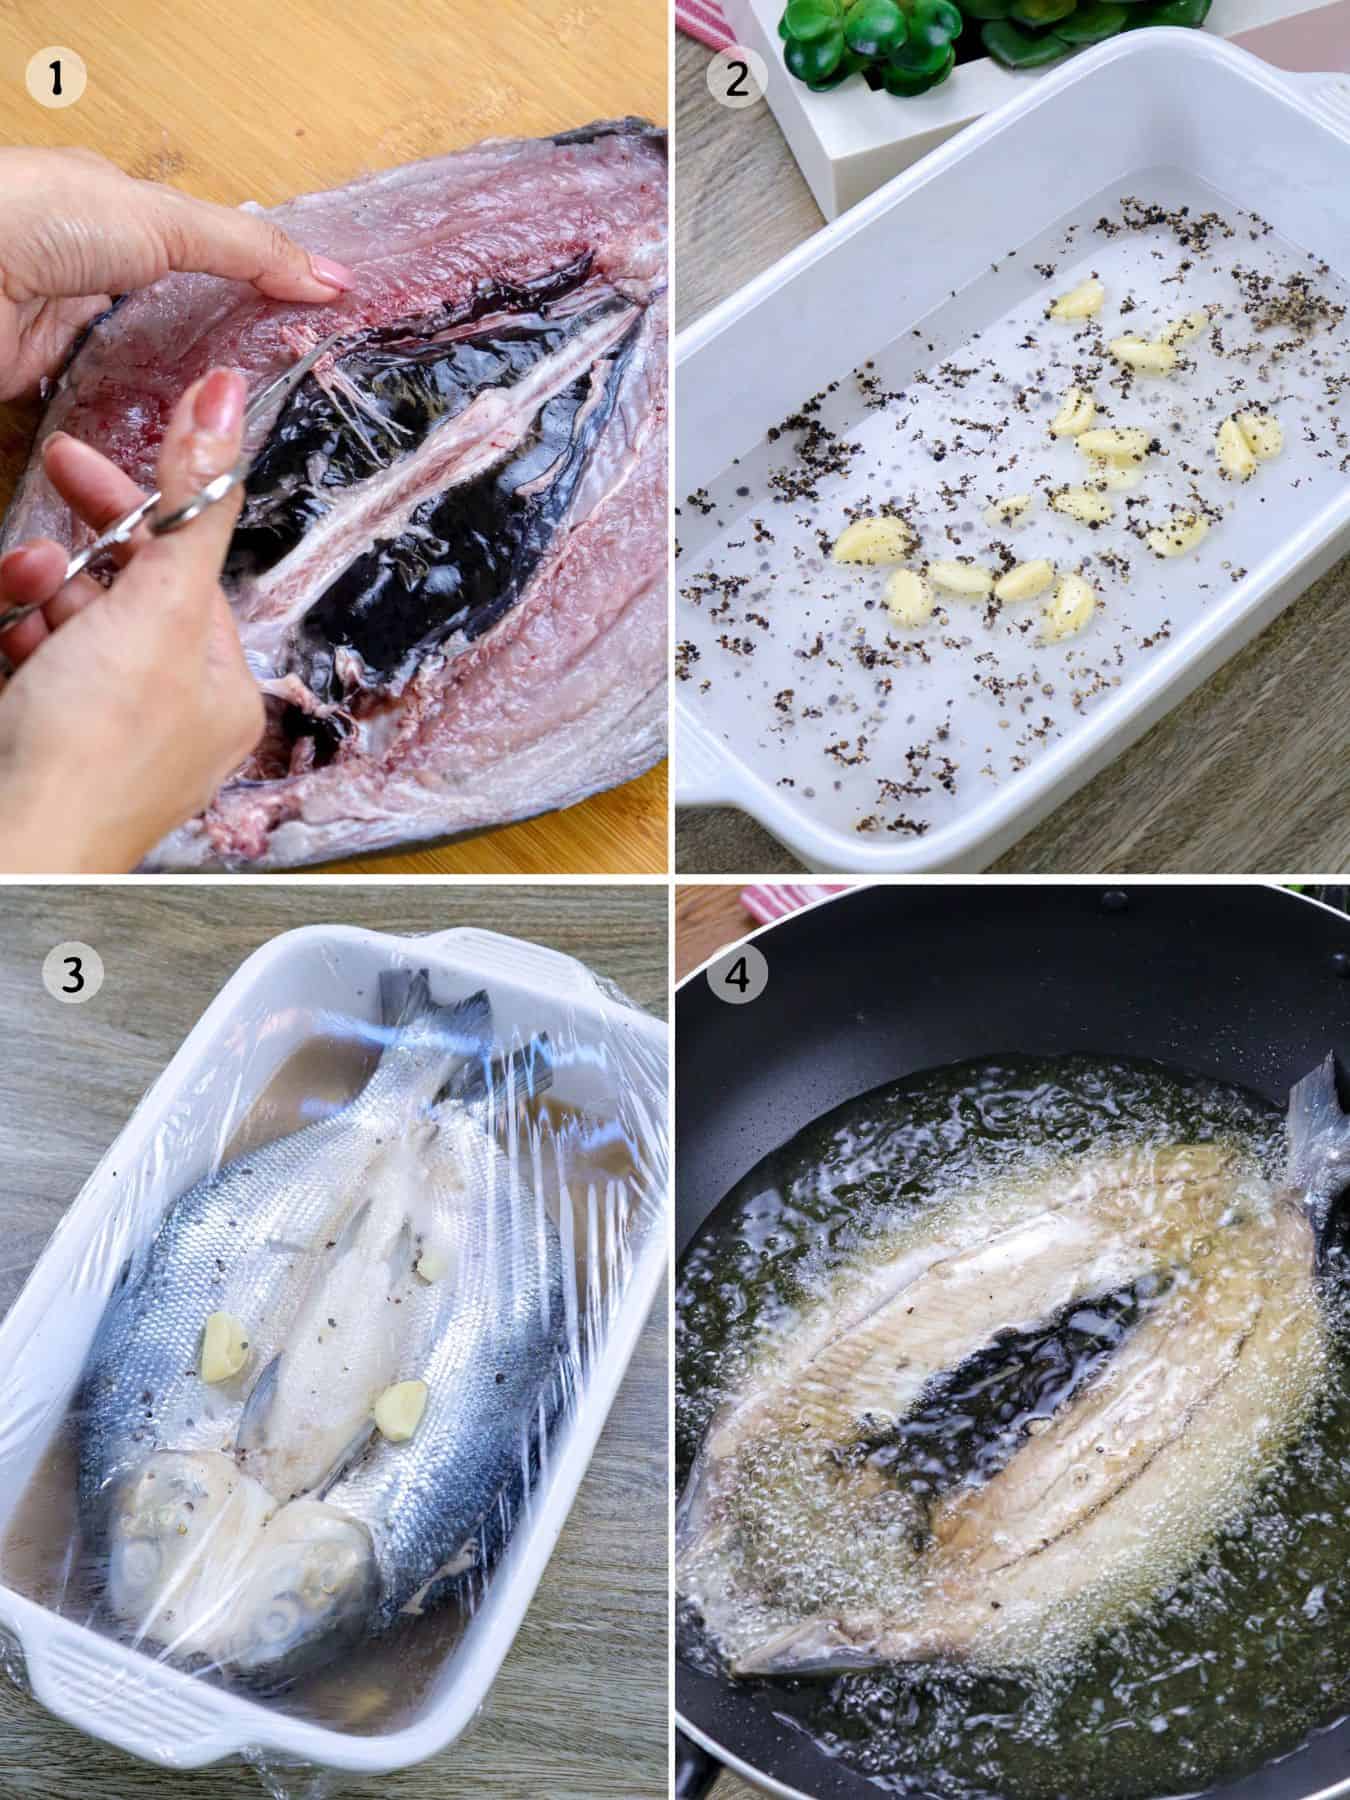 deboning and marinating bangus in vinegar and spices and frying in hot oil in a pan.